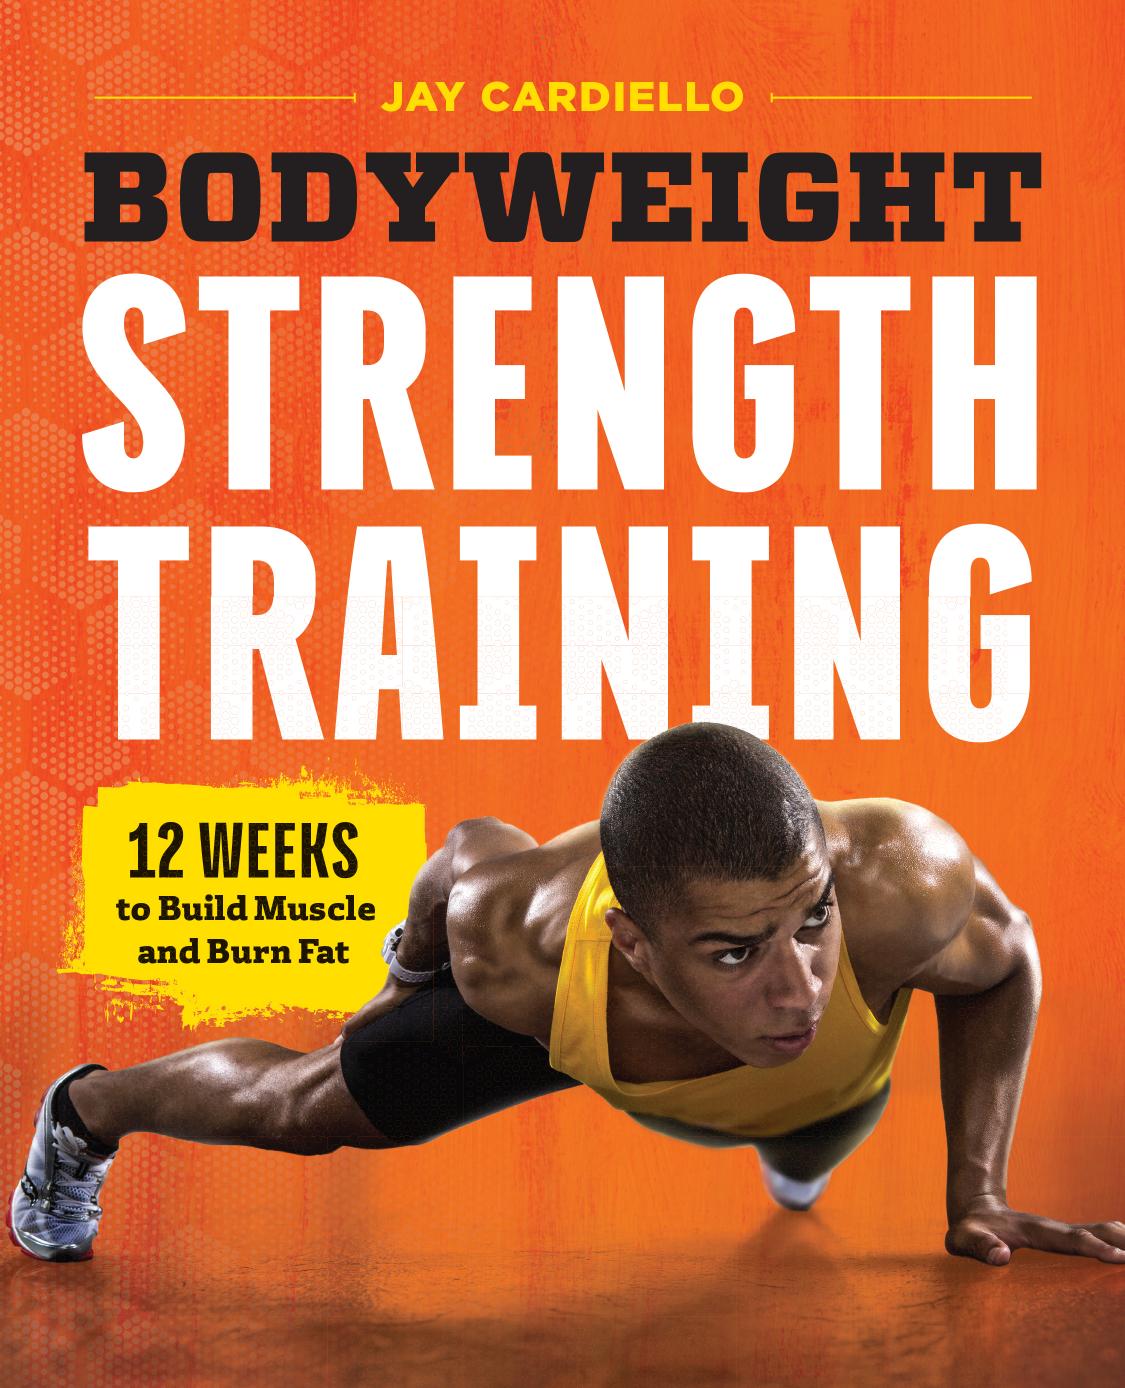 Bodyweight Strength Training: 12 Weeks to Build Muscle and Burn Fat by Jay Cardiello